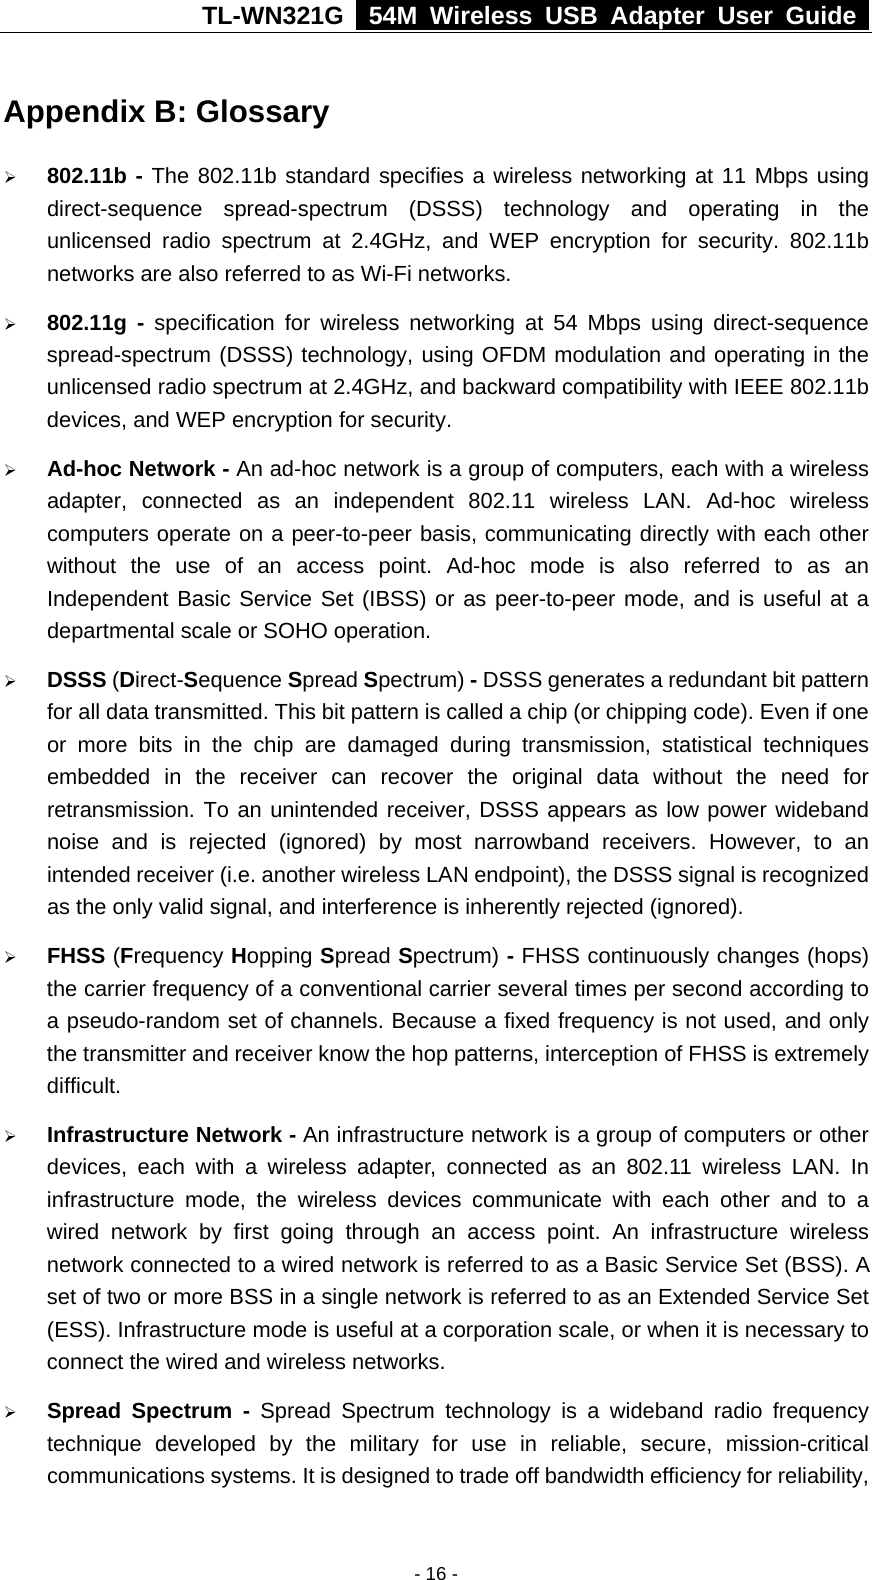 TL-WN321G   54M Wireless USB Adapter User Guide  Appendix B: Glossary ¾ 802.11b - The 802.11b standard specifies a wireless networking at 11 Mbps using direct-sequence spread-spectrum (DSSS) technology and operating in the unlicensed radio spectrum at 2.4GHz, and WEP encryption for security. 802.11b networks are also referred to as Wi-Fi networks. ¾ 802.11g - specification for wireless networking at 54 Mbps using direct-sequence spread-spectrum (DSSS) technology, using OFDM modulation and operating in the unlicensed radio spectrum at 2.4GHz, and backward compatibility with IEEE 802.11b devices, and WEP encryption for security. ¾ Ad-hoc Network - An ad-hoc network is a group of computers, each with a wireless adapter, connected as an independent 802.11 wireless LAN. Ad-hoc wireless computers operate on a peer-to-peer basis, communicating directly with each other without the use of an access point. Ad-hoc mode is also referred to as an Independent Basic Service Set (IBSS) or as peer-to-peer mode, and is useful at a departmental scale or SOHO operation. ¾ DSSS (Direct-Sequence Spread Spectrum) - DSSS generates a redundant bit pattern for all data transmitted. This bit pattern is called a chip (or chipping code). Even if one or more bits in the chip are damaged during transmission, statistical techniques embedded in the receiver can recover the original data without the need for retransmission. To an unintended receiver, DSSS appears as low power wideband noise and is rejected (ignored) by most narrowband receivers. However, to an intended receiver (i.e. another wireless LAN endpoint), the DSSS signal is recognized as the only valid signal, and interference is inherently rejected (ignored).  ¾ FHSS (Frequency Hopping Spread Spectrum) - FHSS continuously changes (hops) the carrier frequency of a conventional carrier several times per second according to a pseudo-random set of channels. Because a fixed frequency is not used, and only the transmitter and receiver know the hop patterns, interception of FHSS is extremely difficult. ¾ Infrastructure Network - An infrastructure network is a group of computers or other devices, each with a wireless adapter, connected as an 802.11 wireless LAN. In infrastructure mode, the wireless devices communicate with each other and to a wired network by first going through an access point. An infrastructure wireless network connected to a wired network is referred to as a Basic Service Set (BSS). A set of two or more BSS in a single network is referred to as an Extended Service Set (ESS). Infrastructure mode is useful at a corporation scale, or when it is necessary to connect the wired and wireless networks.   ¾ Spread Spectrum - Spread Spectrum technology is a wideband radio frequency technique developed by the military for use in reliable, secure, mission-critical communications systems. It is designed to trade off bandwidth efficiency for reliability, - 16 -